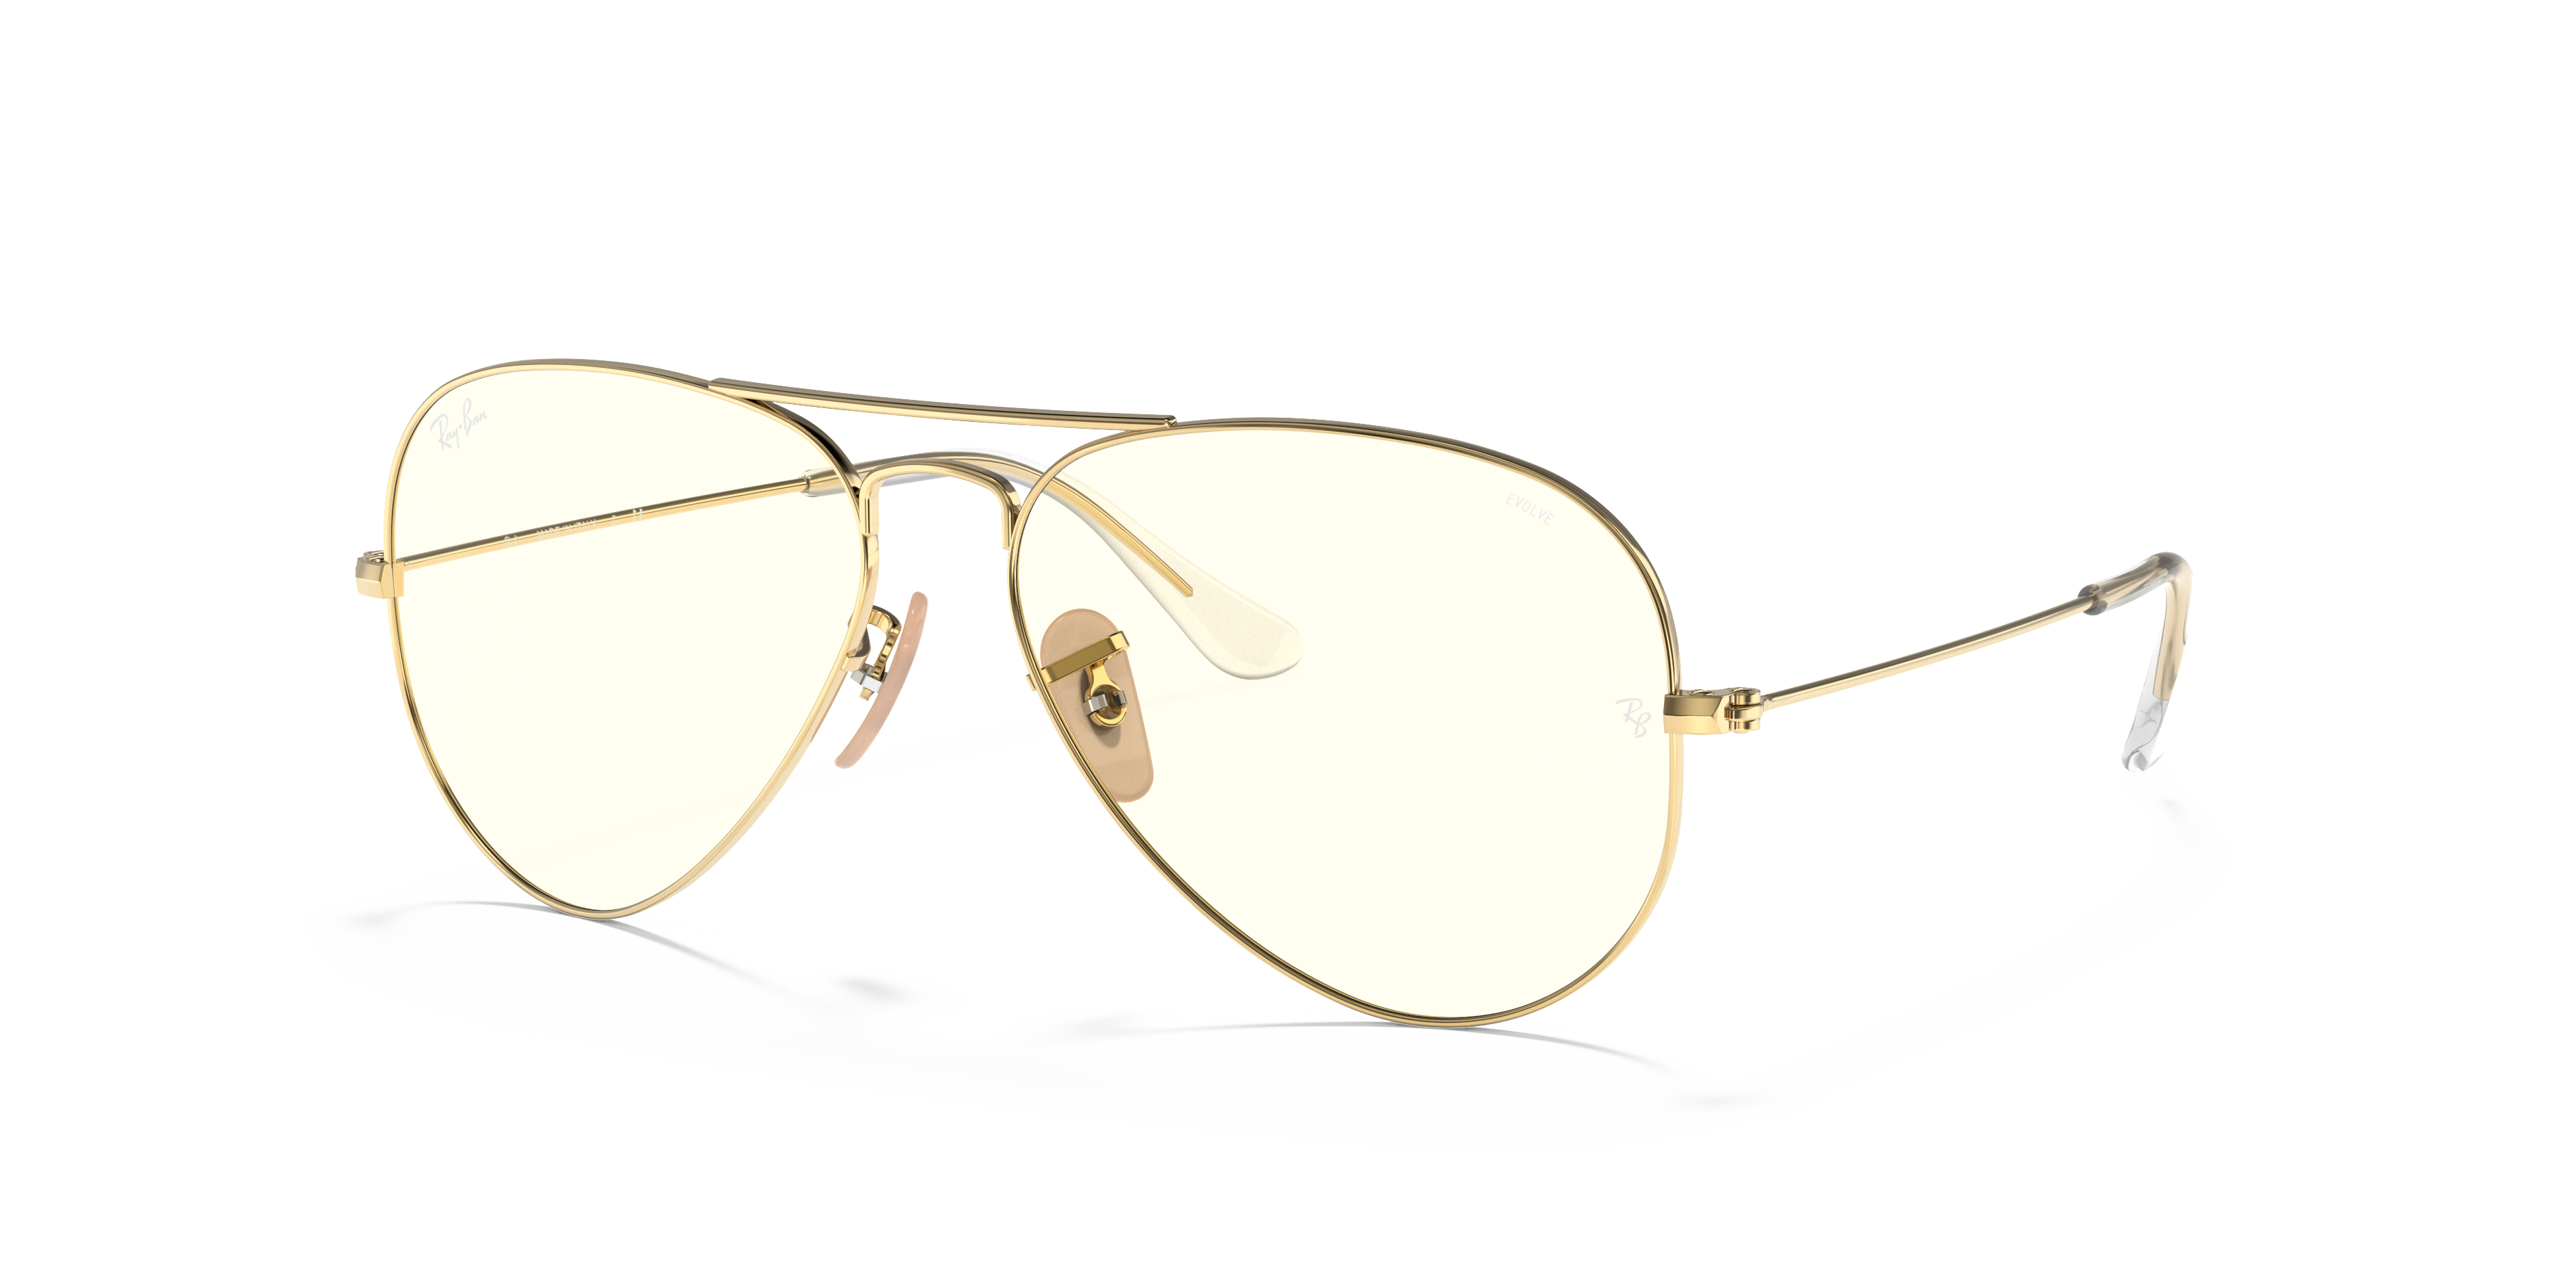 NEW GOLD AVIATOR FRAME ROUND PILOT STYLE GLASSES CLEAR LENS QUALITY NOSE GUARD 